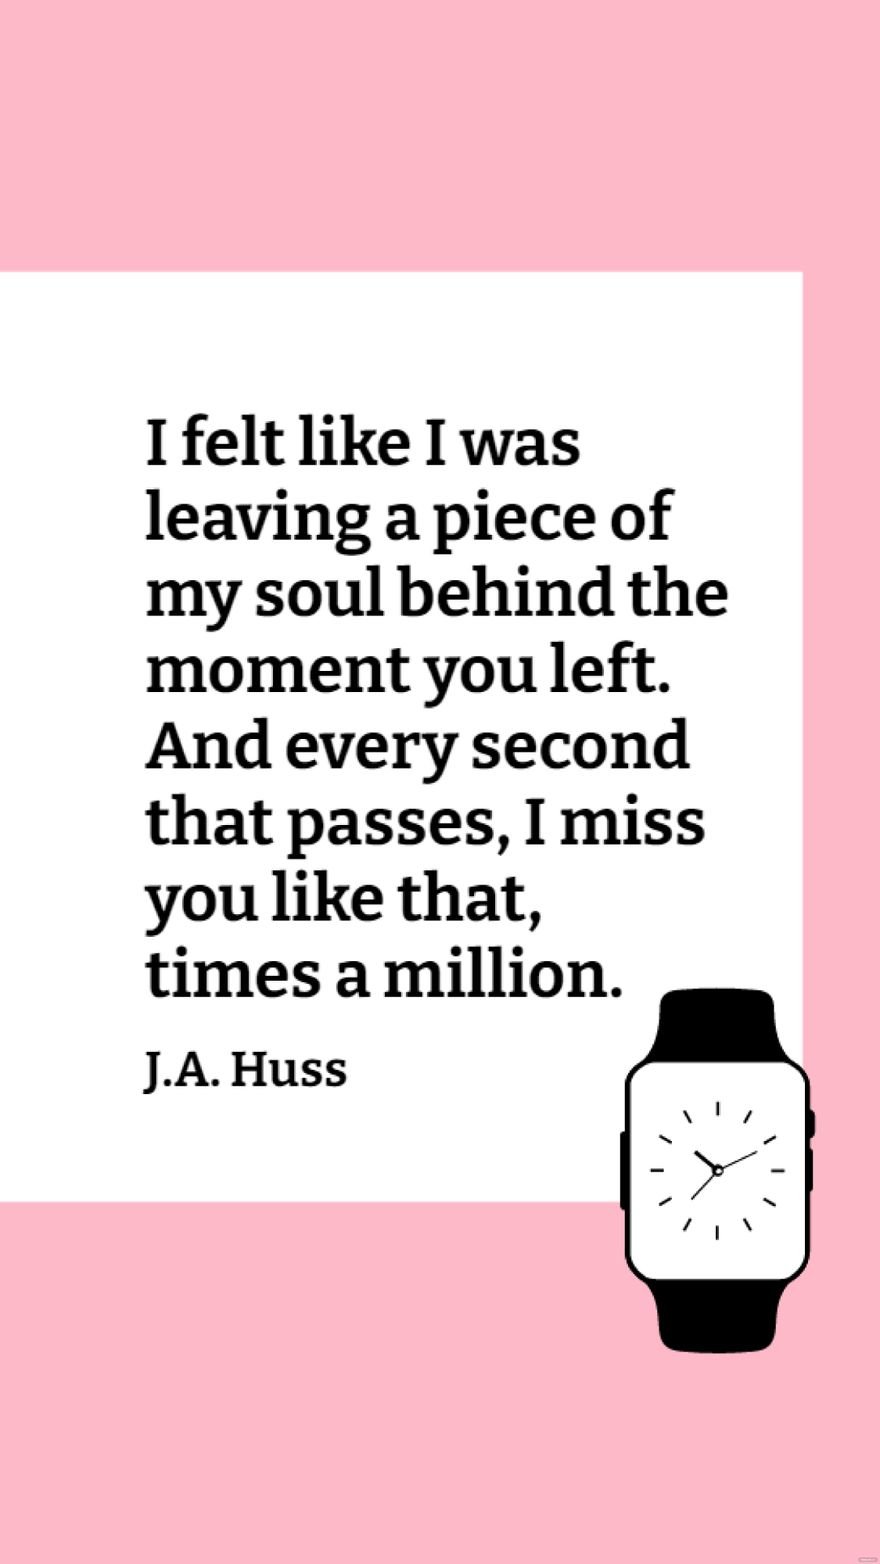 J.A. Huss - I felt like I was leaving a piece of my soul behind the moment you left. And every second that passes, I miss you like that, times a million.